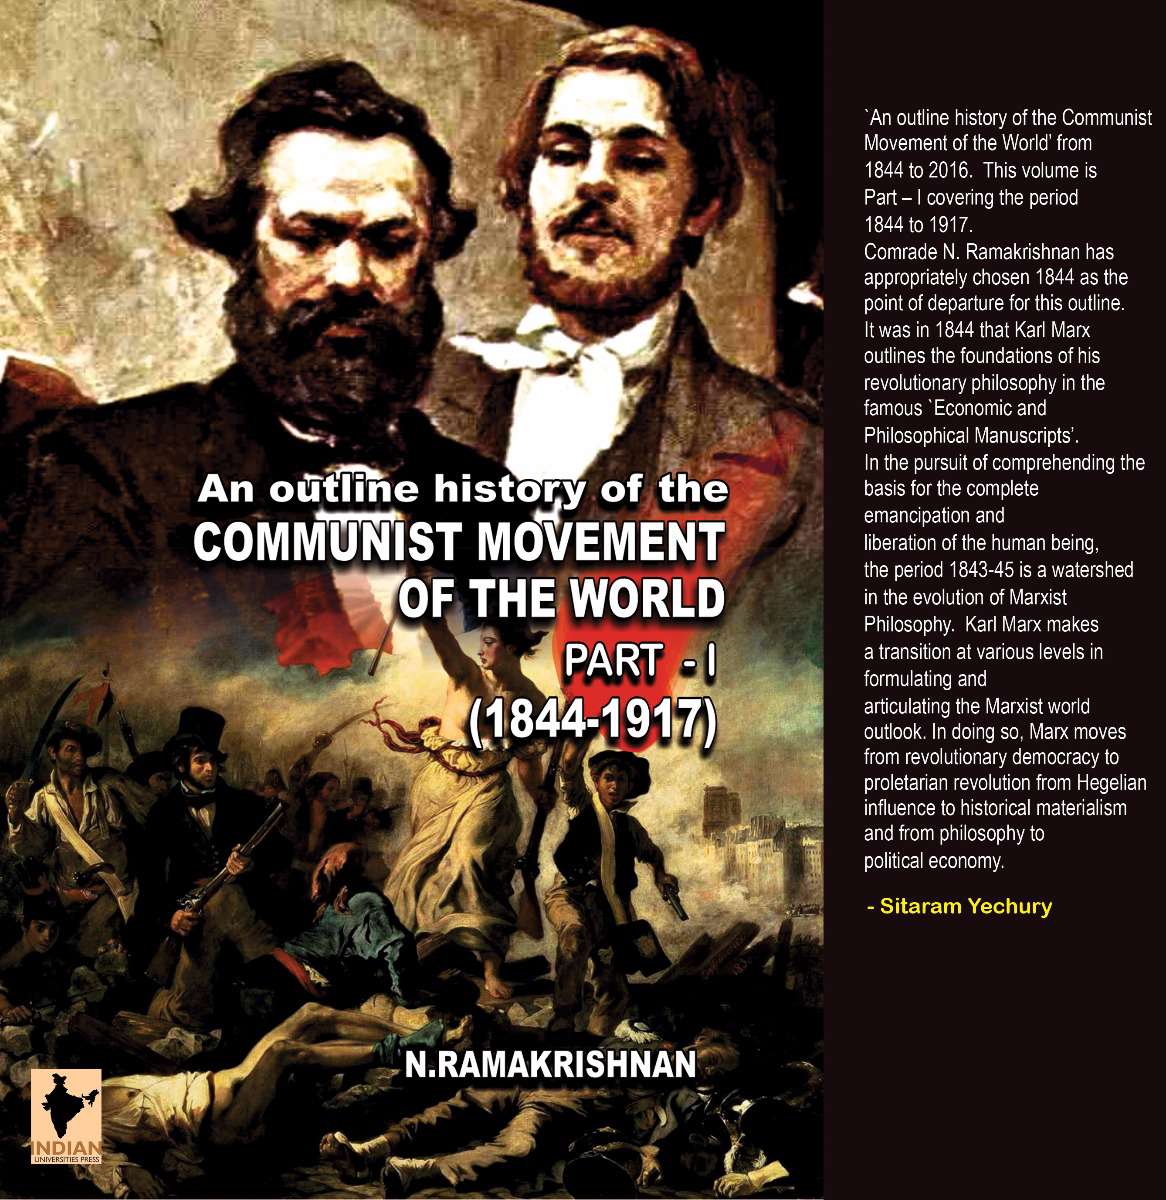 An outline history of the COMMUNIST MOVEMENT OF THE WORLD (Part-1)book